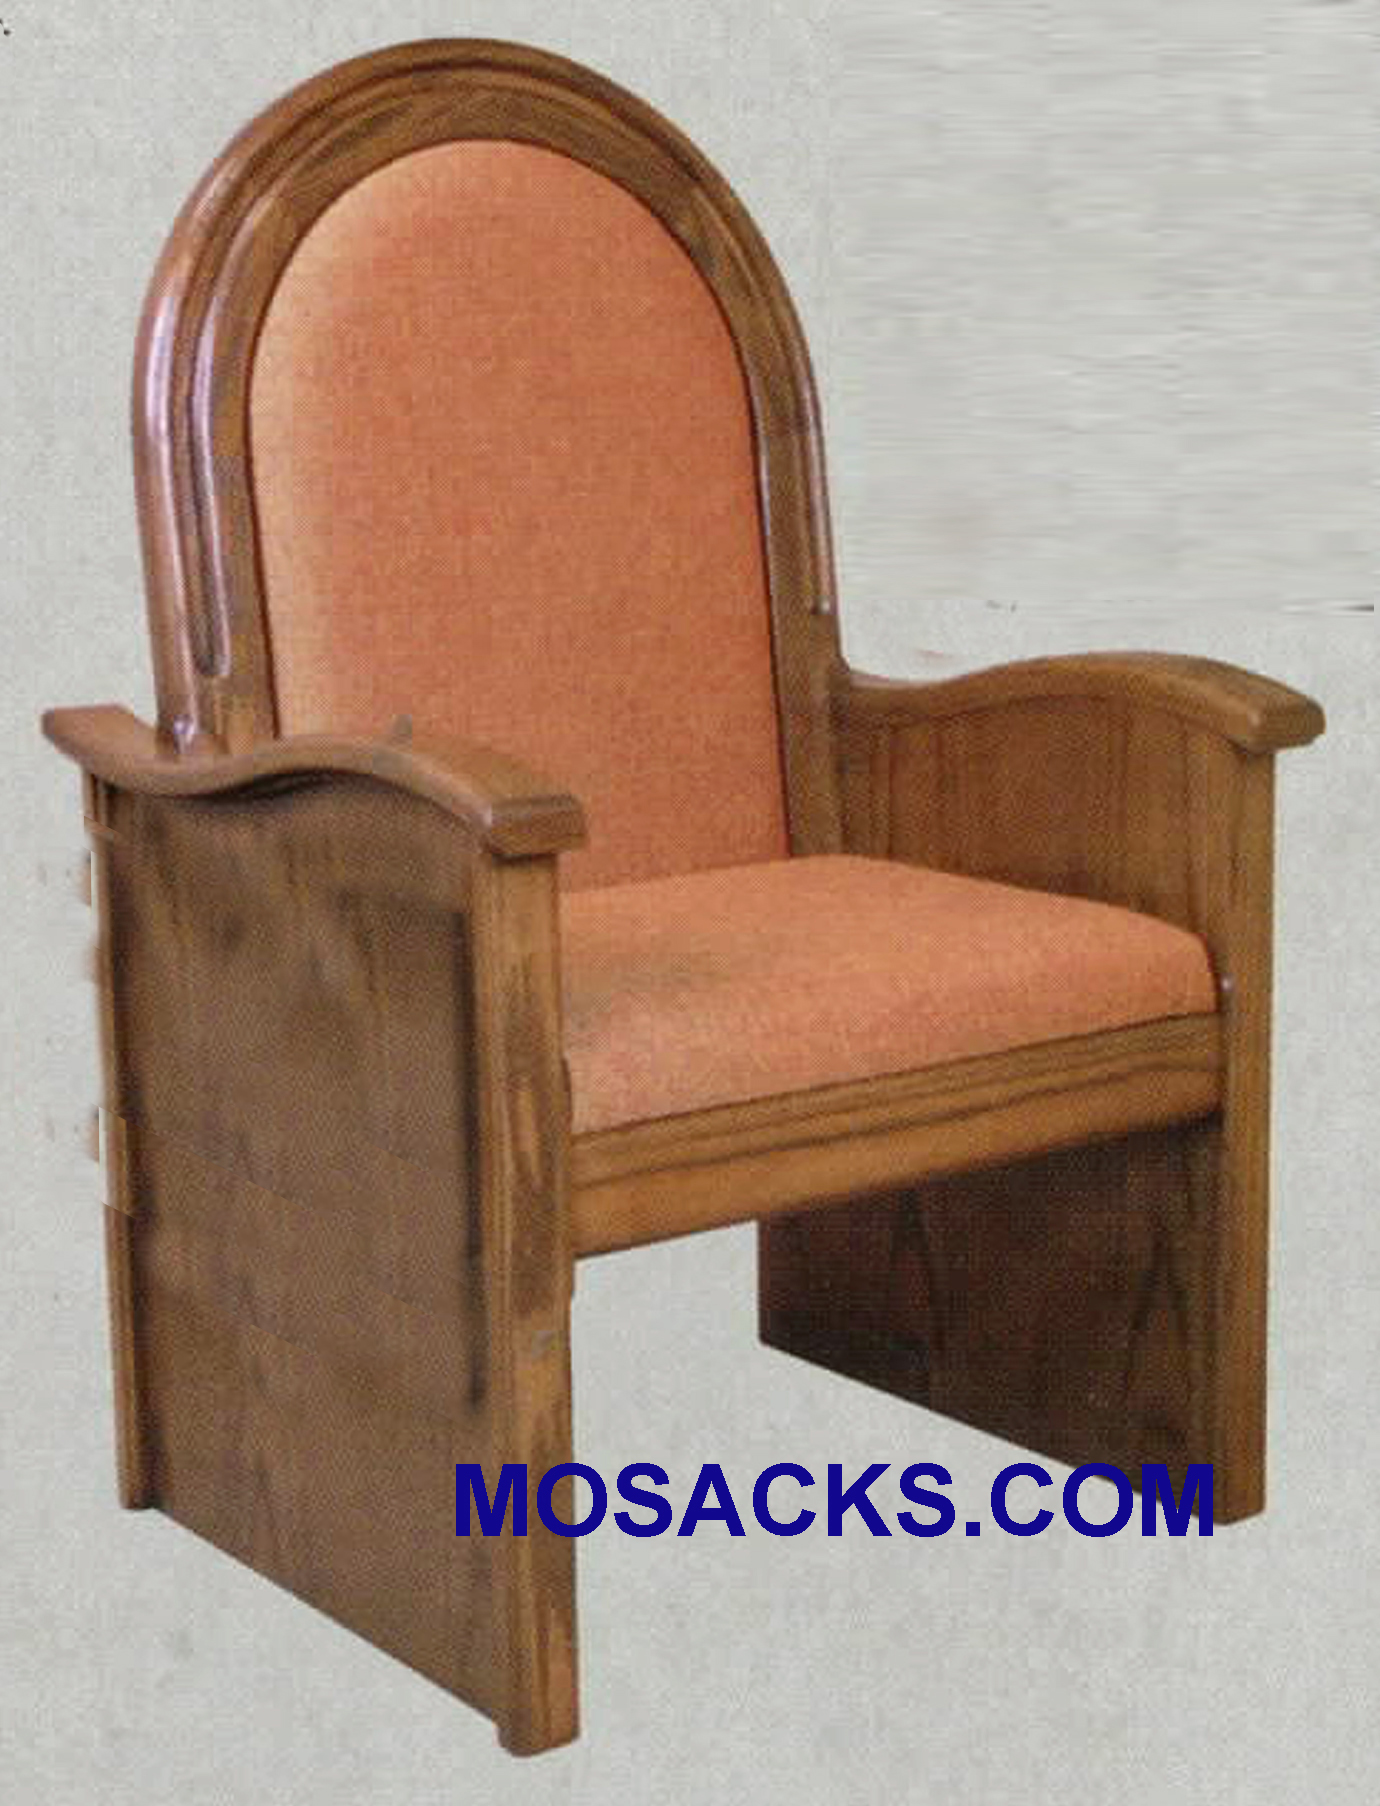 Celebrant Chair w/ upholstered back and seat 30" w x 26" d 56" h 688